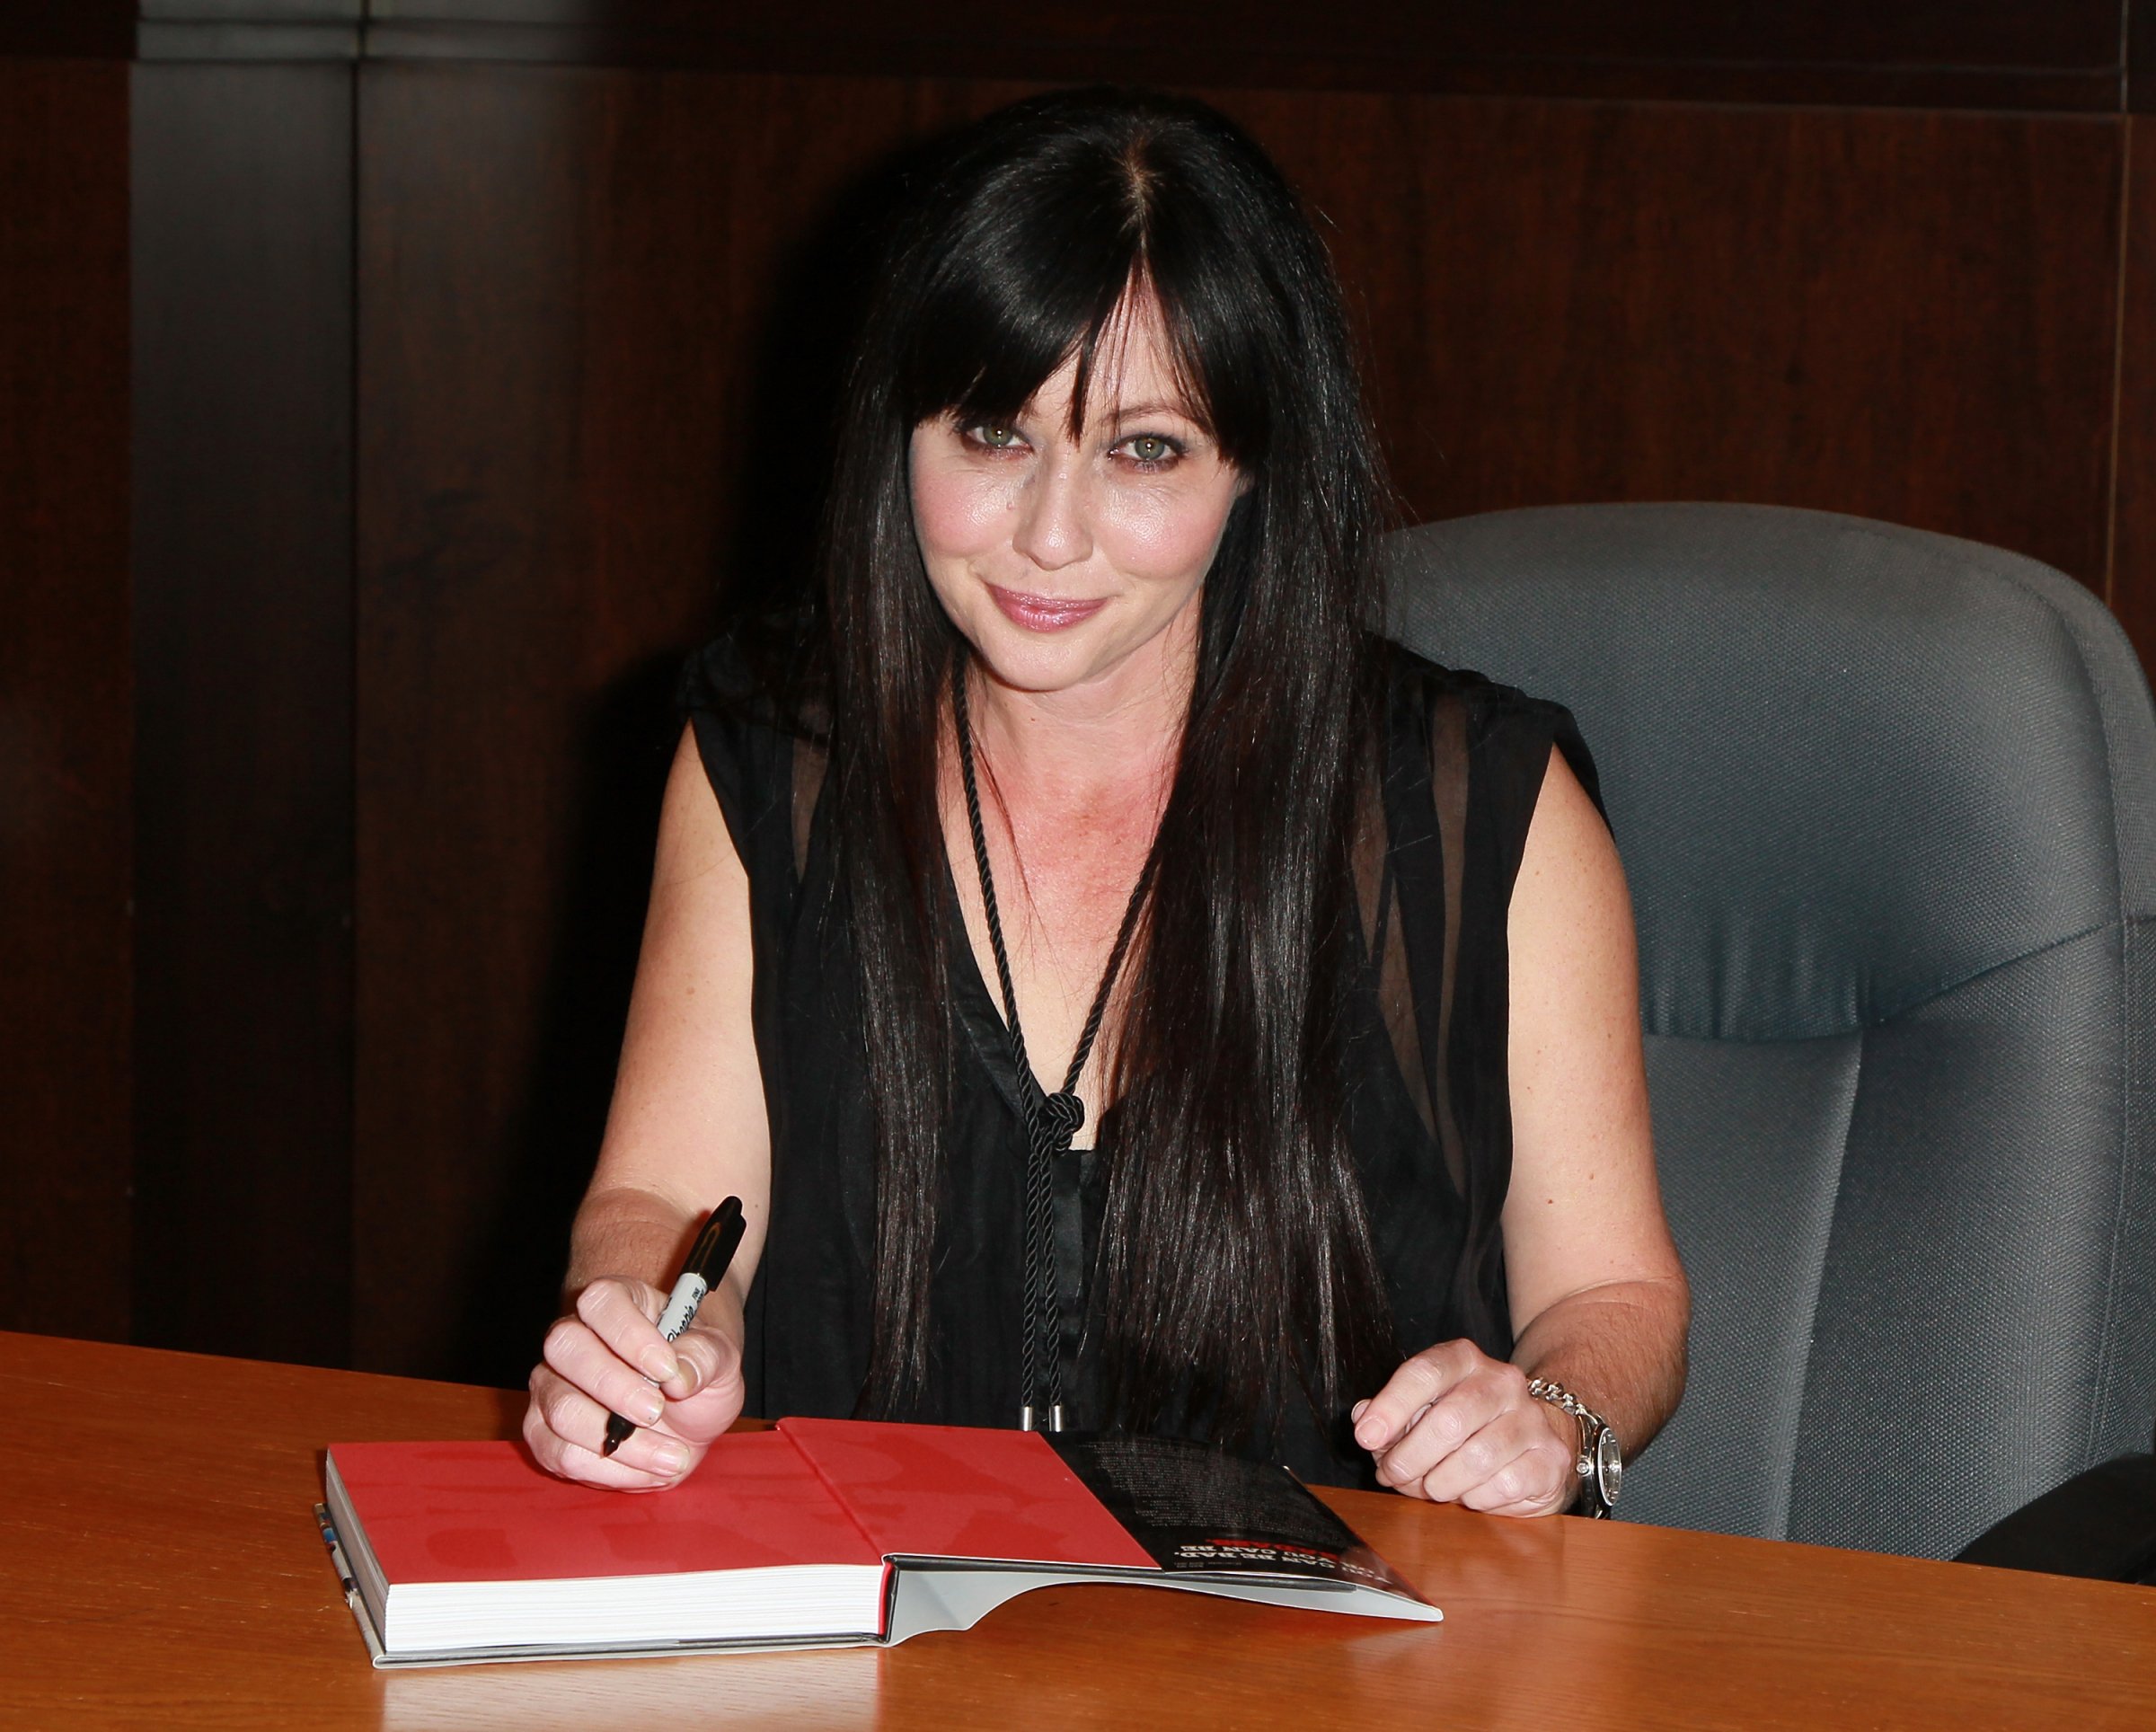 Shannen Doherty Book Signing For "Badass"